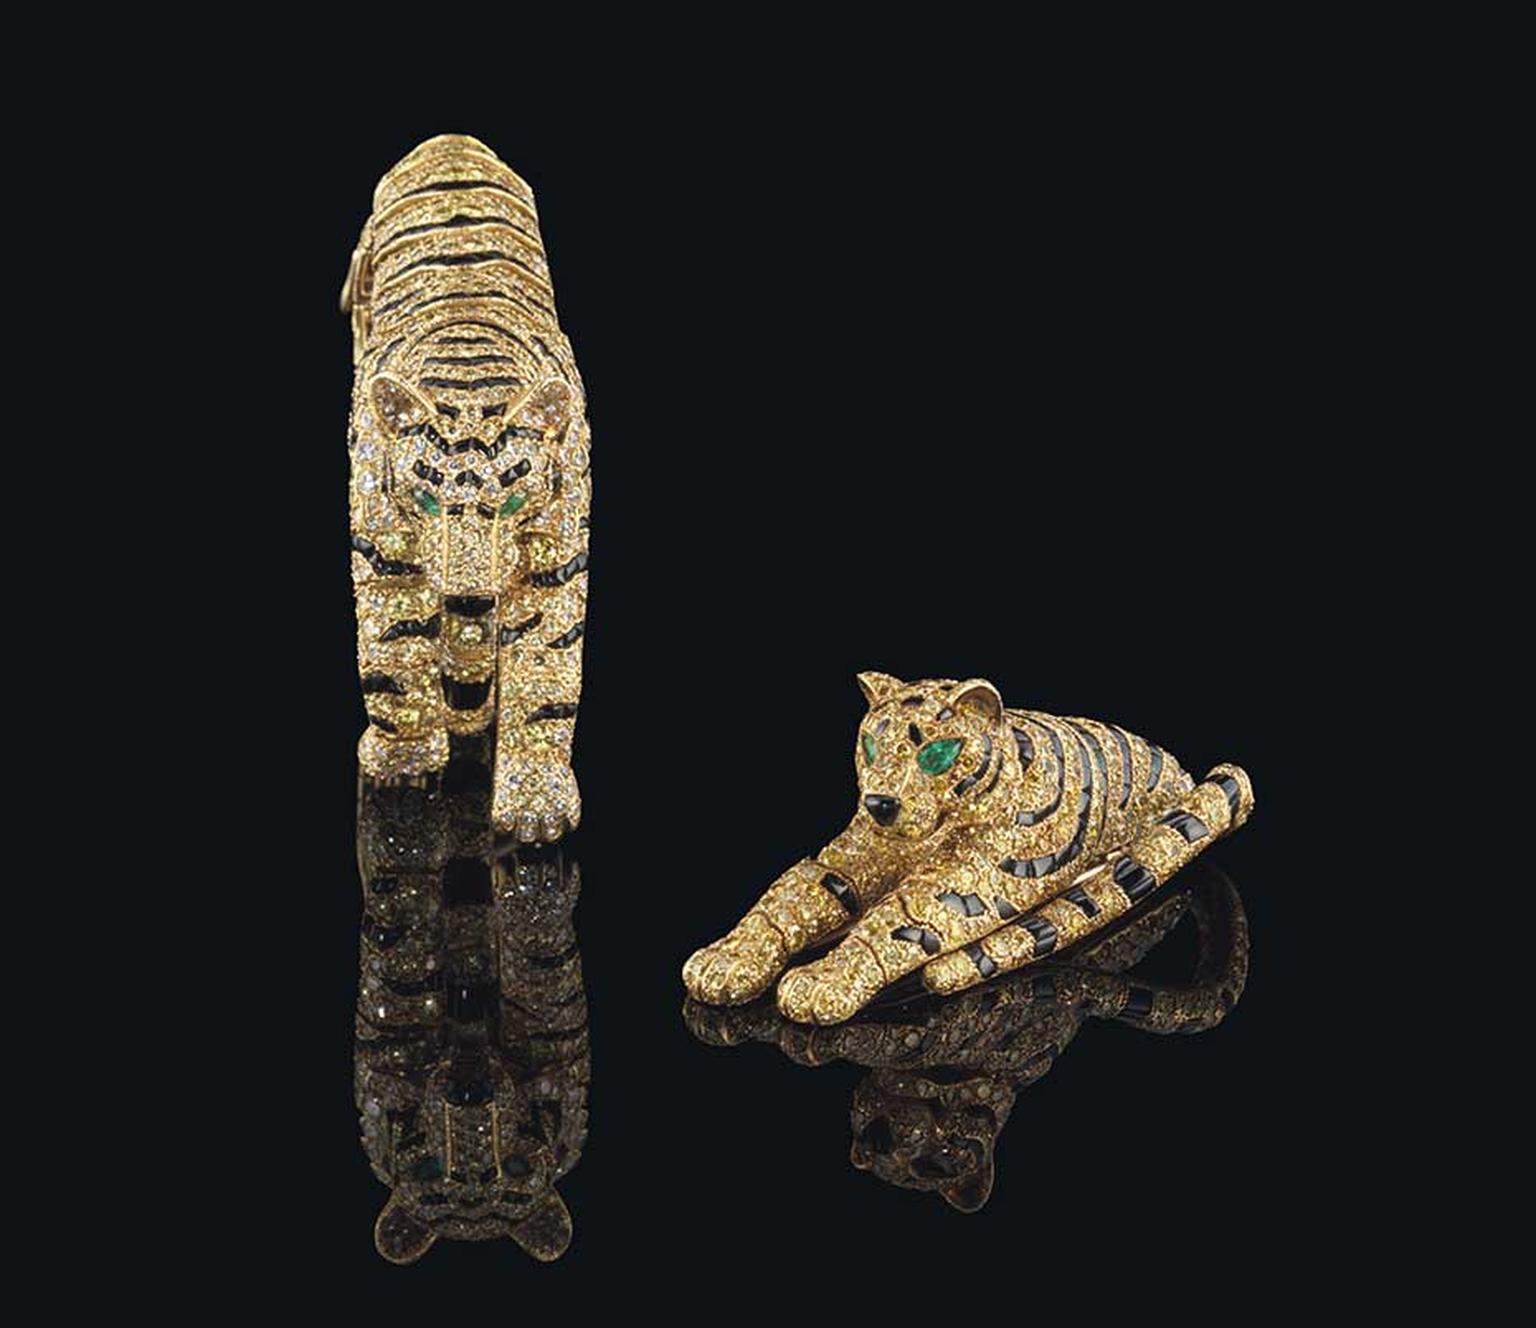 The Cartier Tiger bracelet and clip brooch, with diamonds, onyx and emeralds, which once belonged to the Duchess of Windsor and Sarah Brightman, are being sold as one lot at Christie's Magnificent Jewels auction on 11 November 2014 with a combined pre-sal